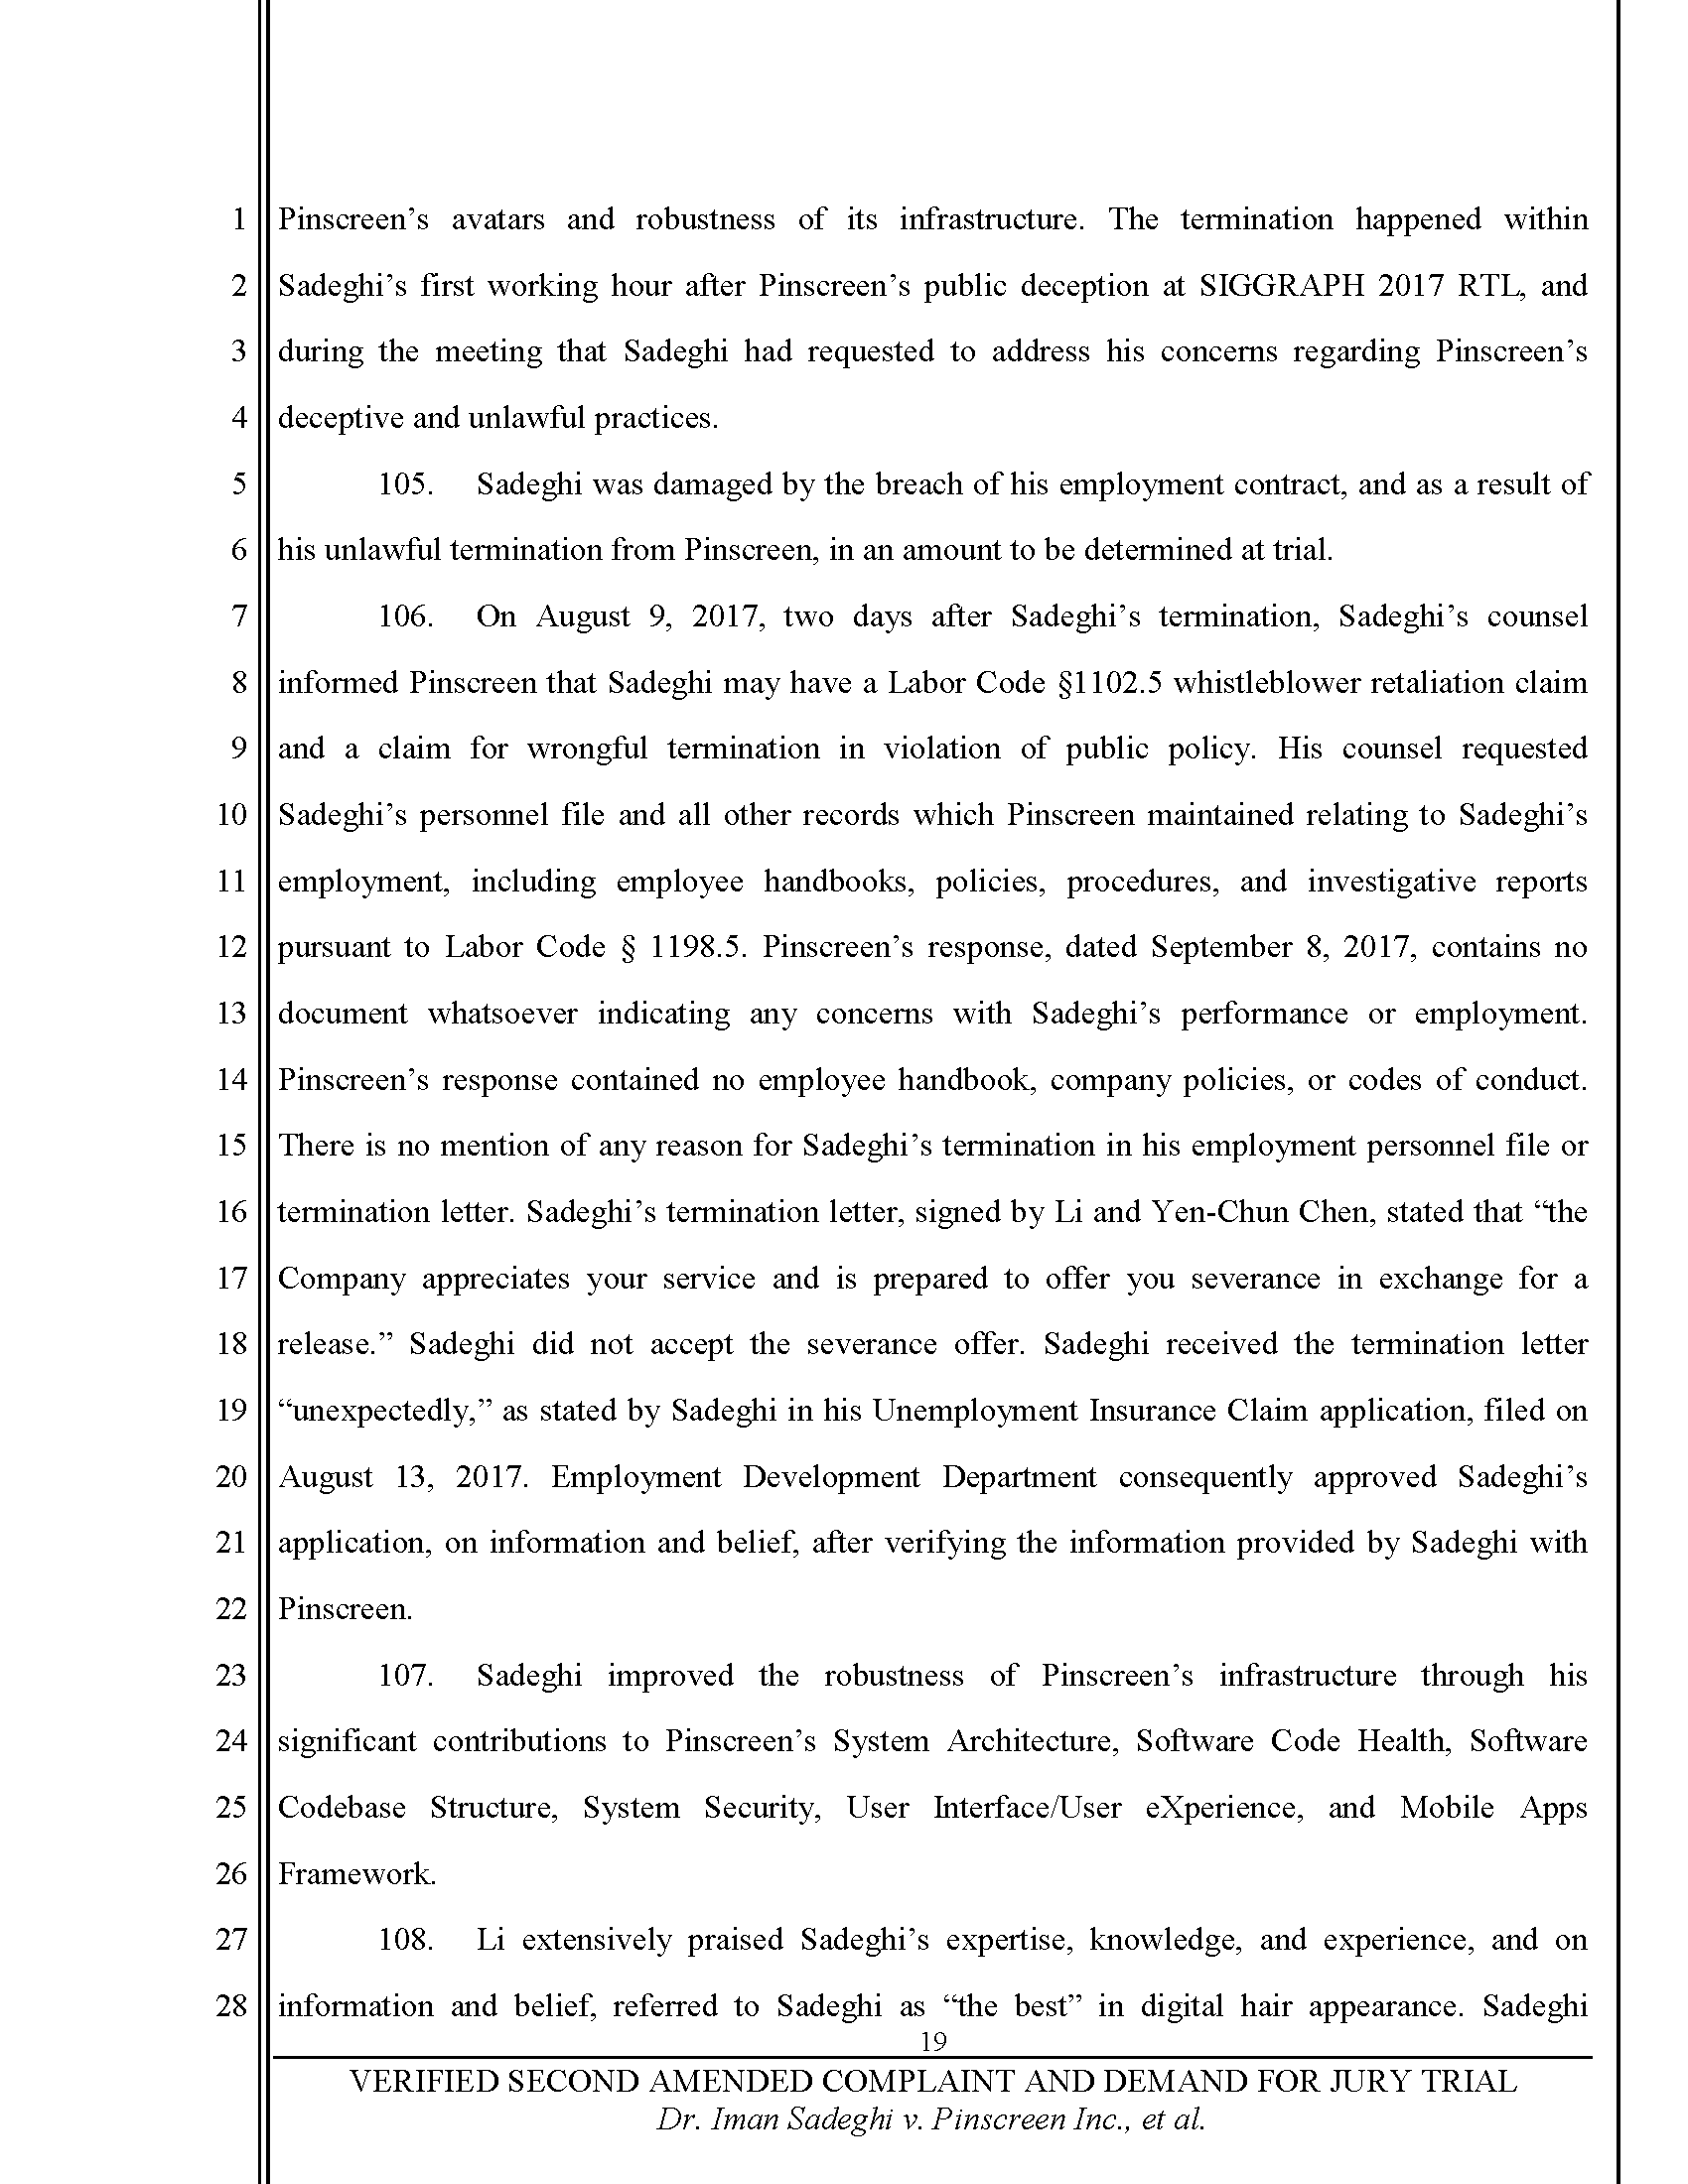 Second Amended Complaint (SAC) Page 20